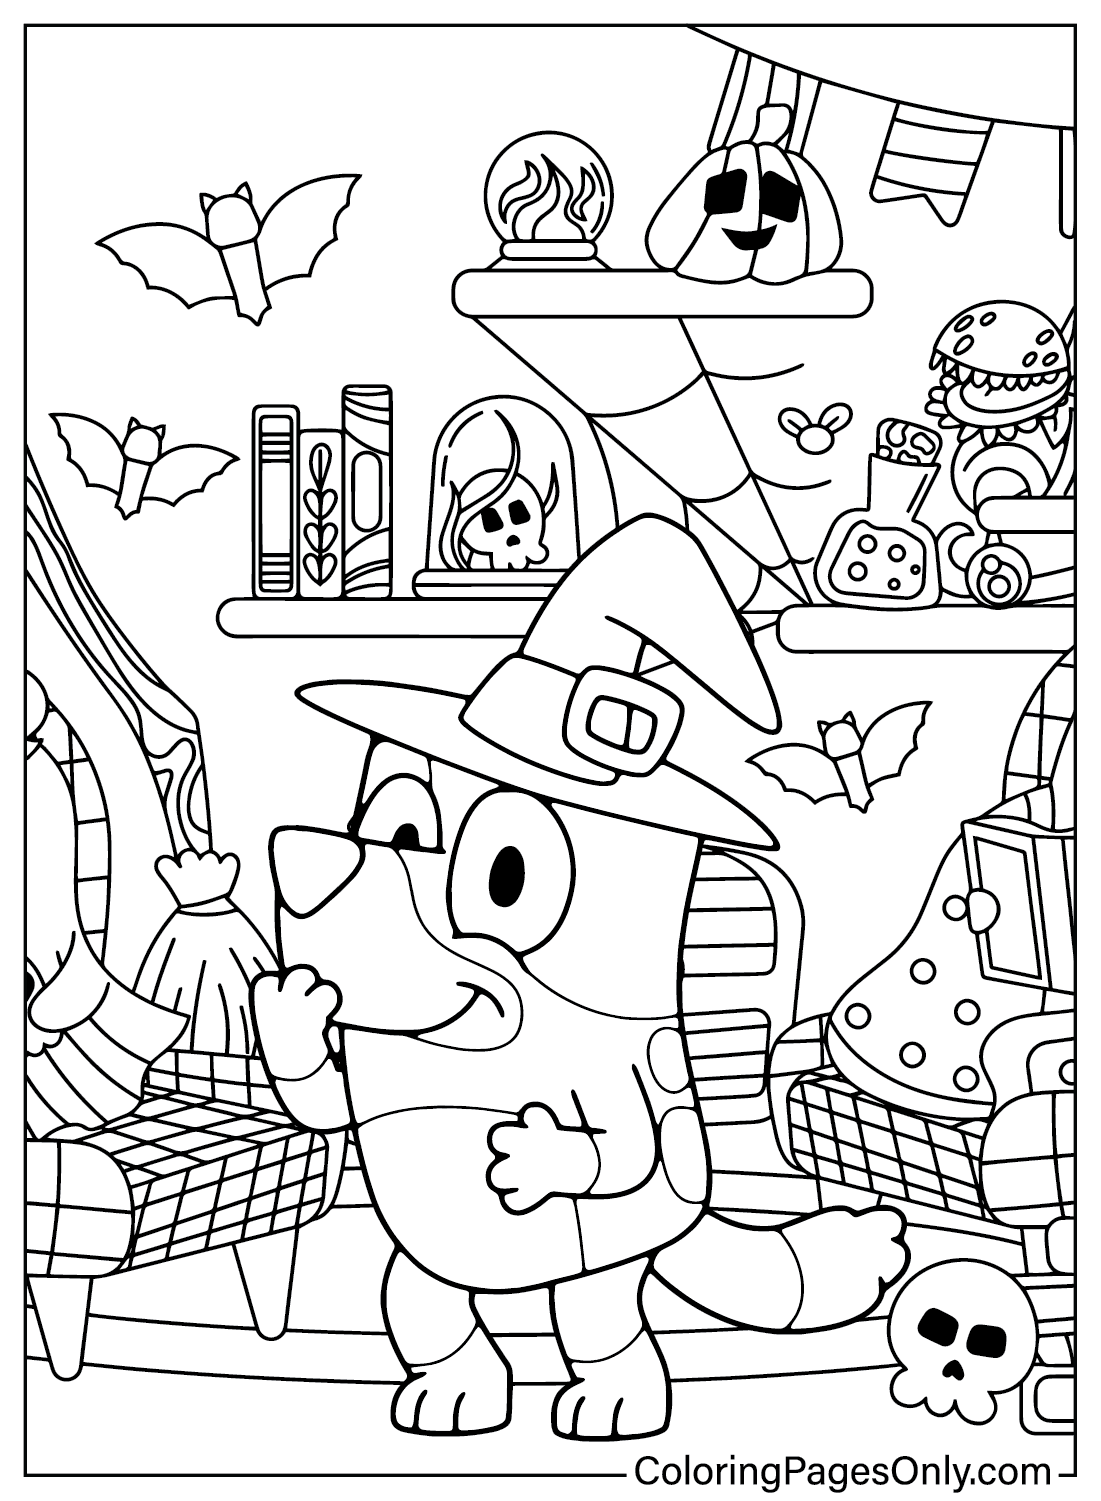 Printable Bluey Halloween Coloring Page from Bluey Halloween